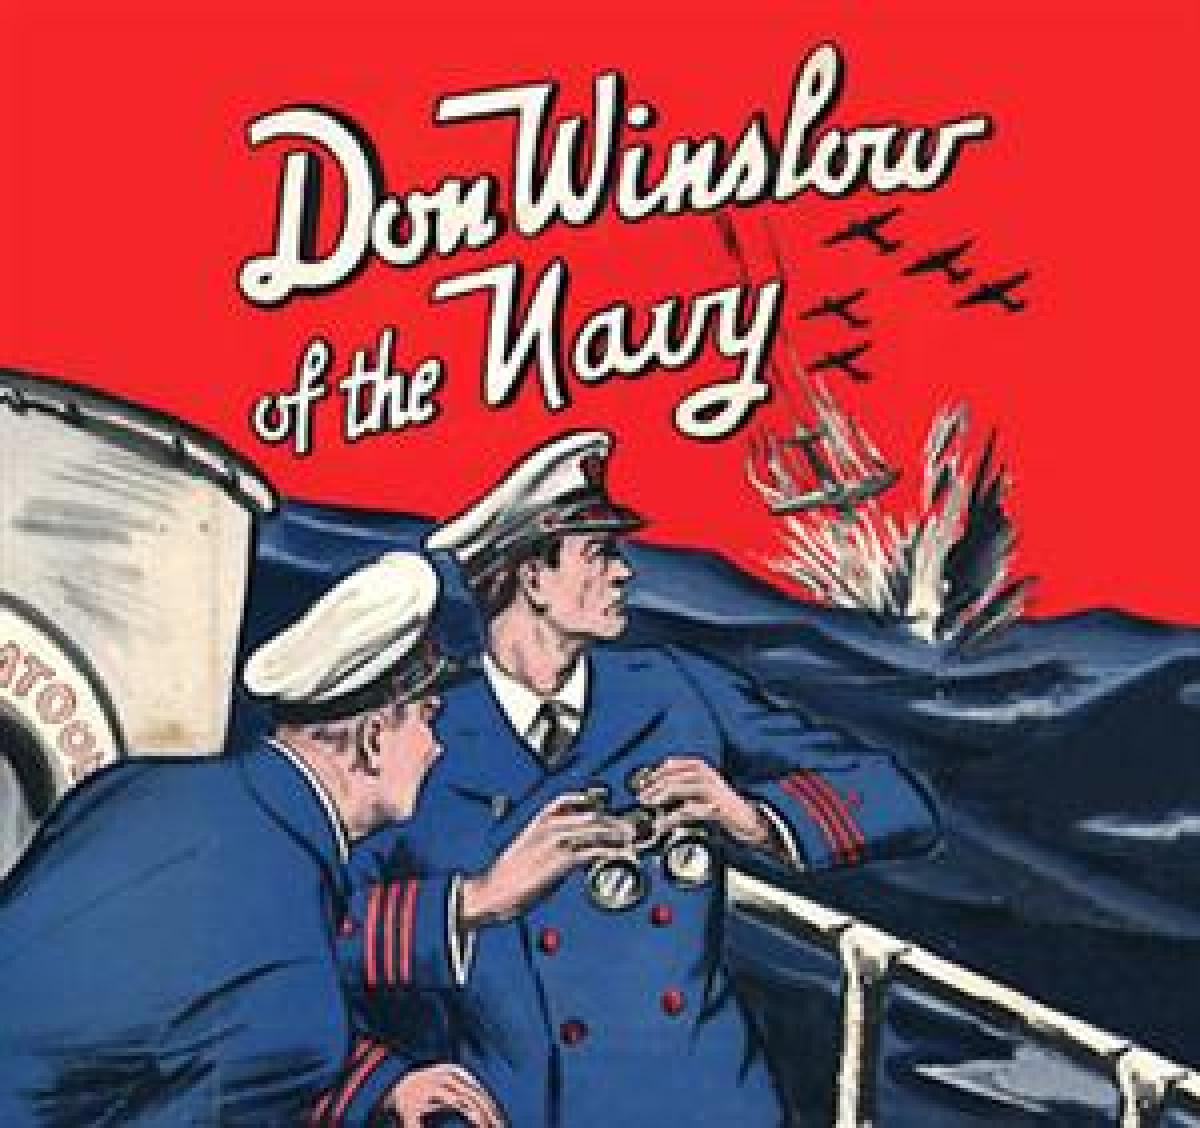 DON WINSLOW OF THE NAVY FILM SERIES SPAWNED A CARTOON STRIP, COMICS, AND BOOKS, SUCH AS THIS ONE PUBLISHED BY GROSSET & DUNLAP BY FRANK V. MARTINEK